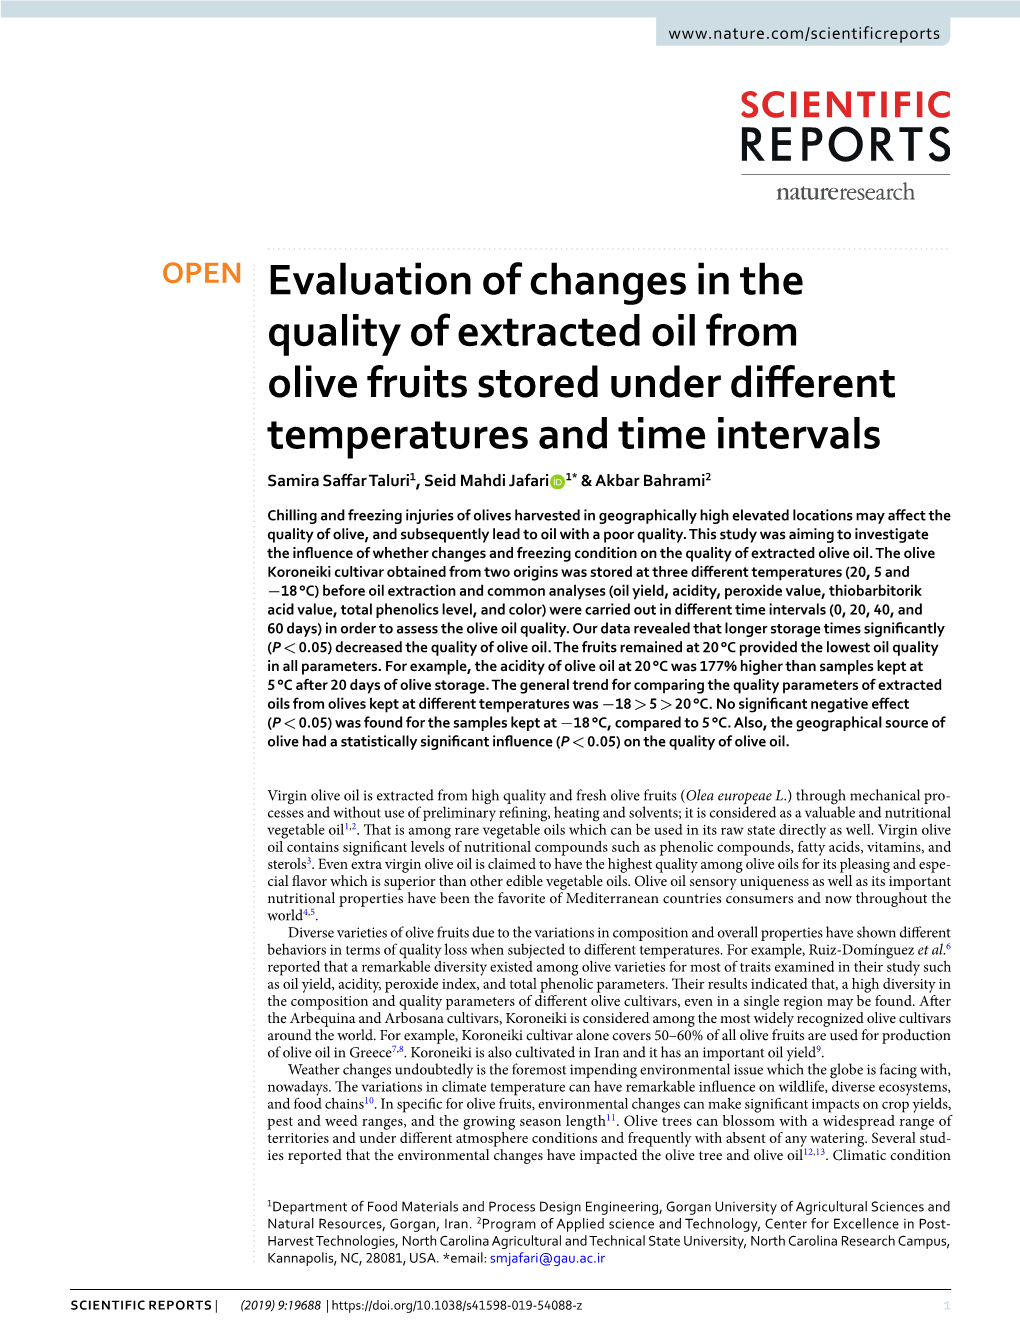 Evaluation of Changes in the Quality of Extracted Oil from Olive Fruits Stored